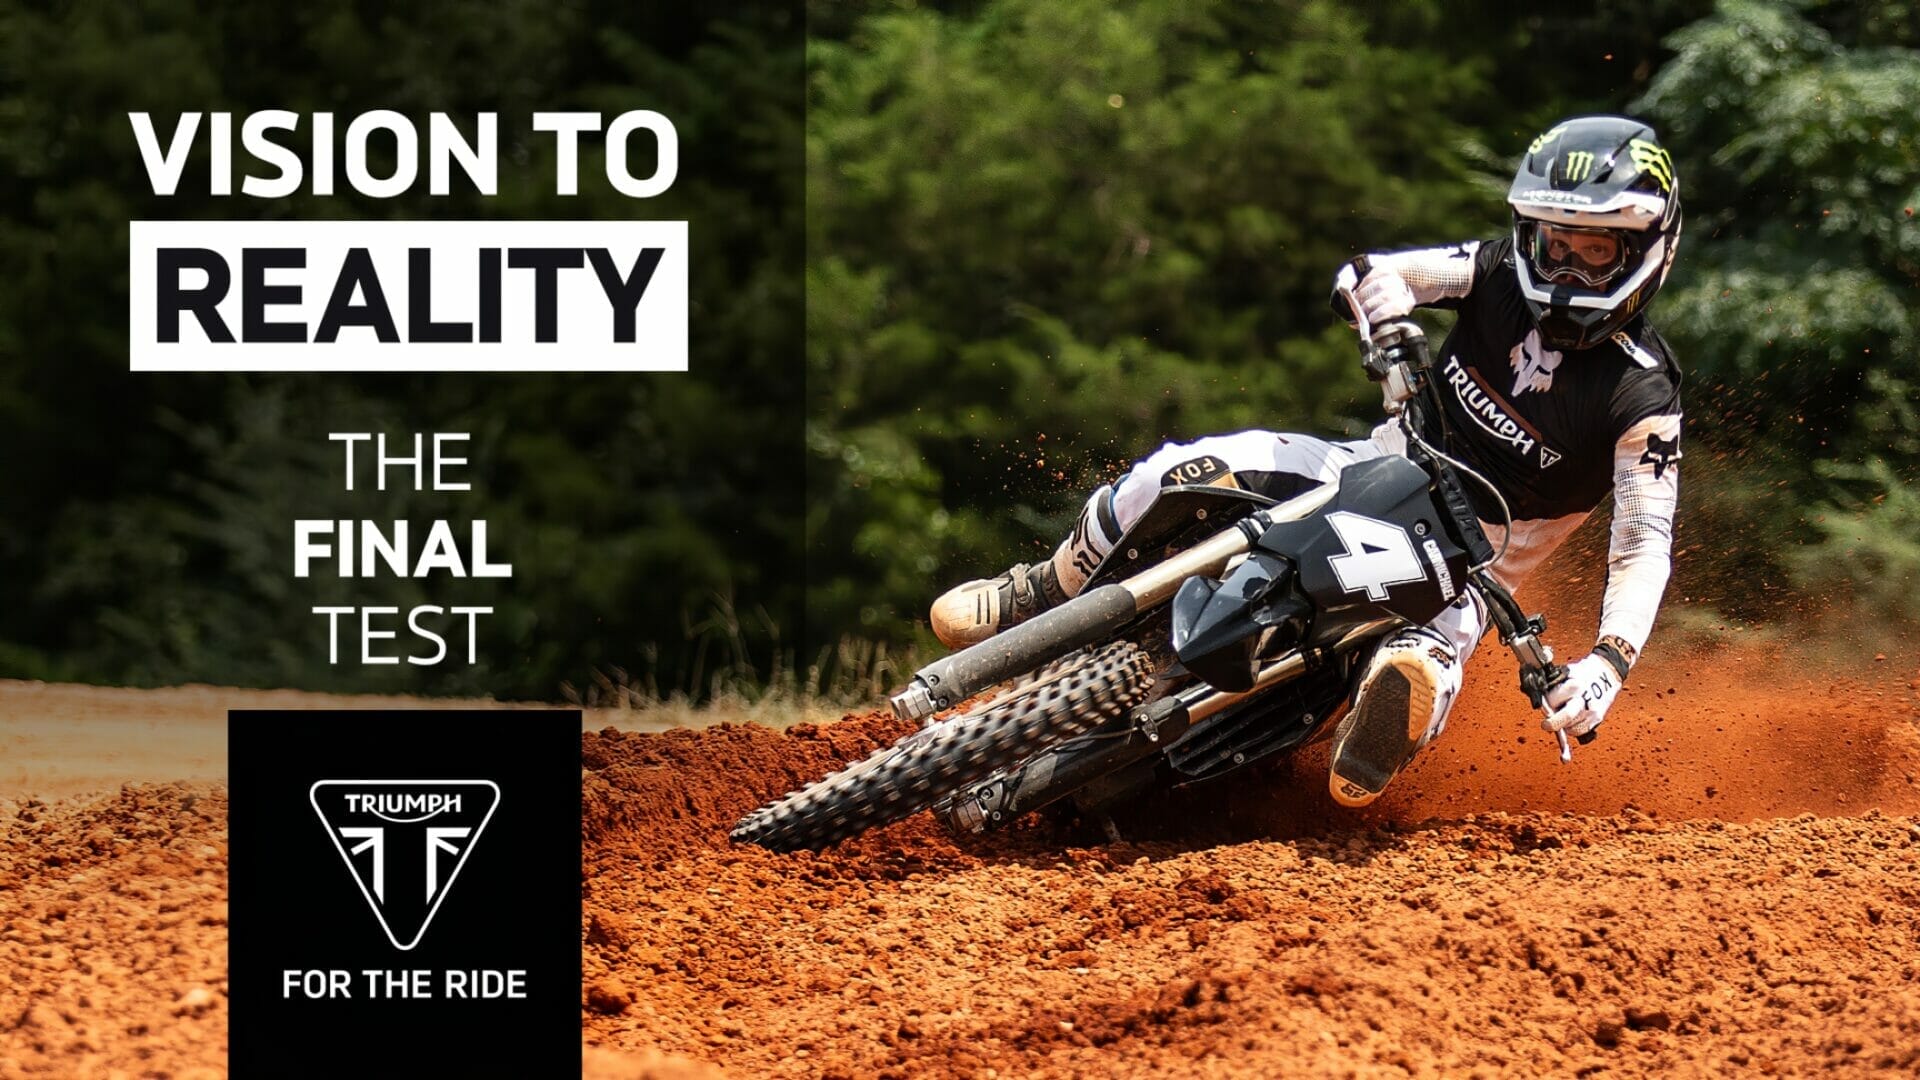 Triumph’s new 250cc motocross bike: from vision to reality